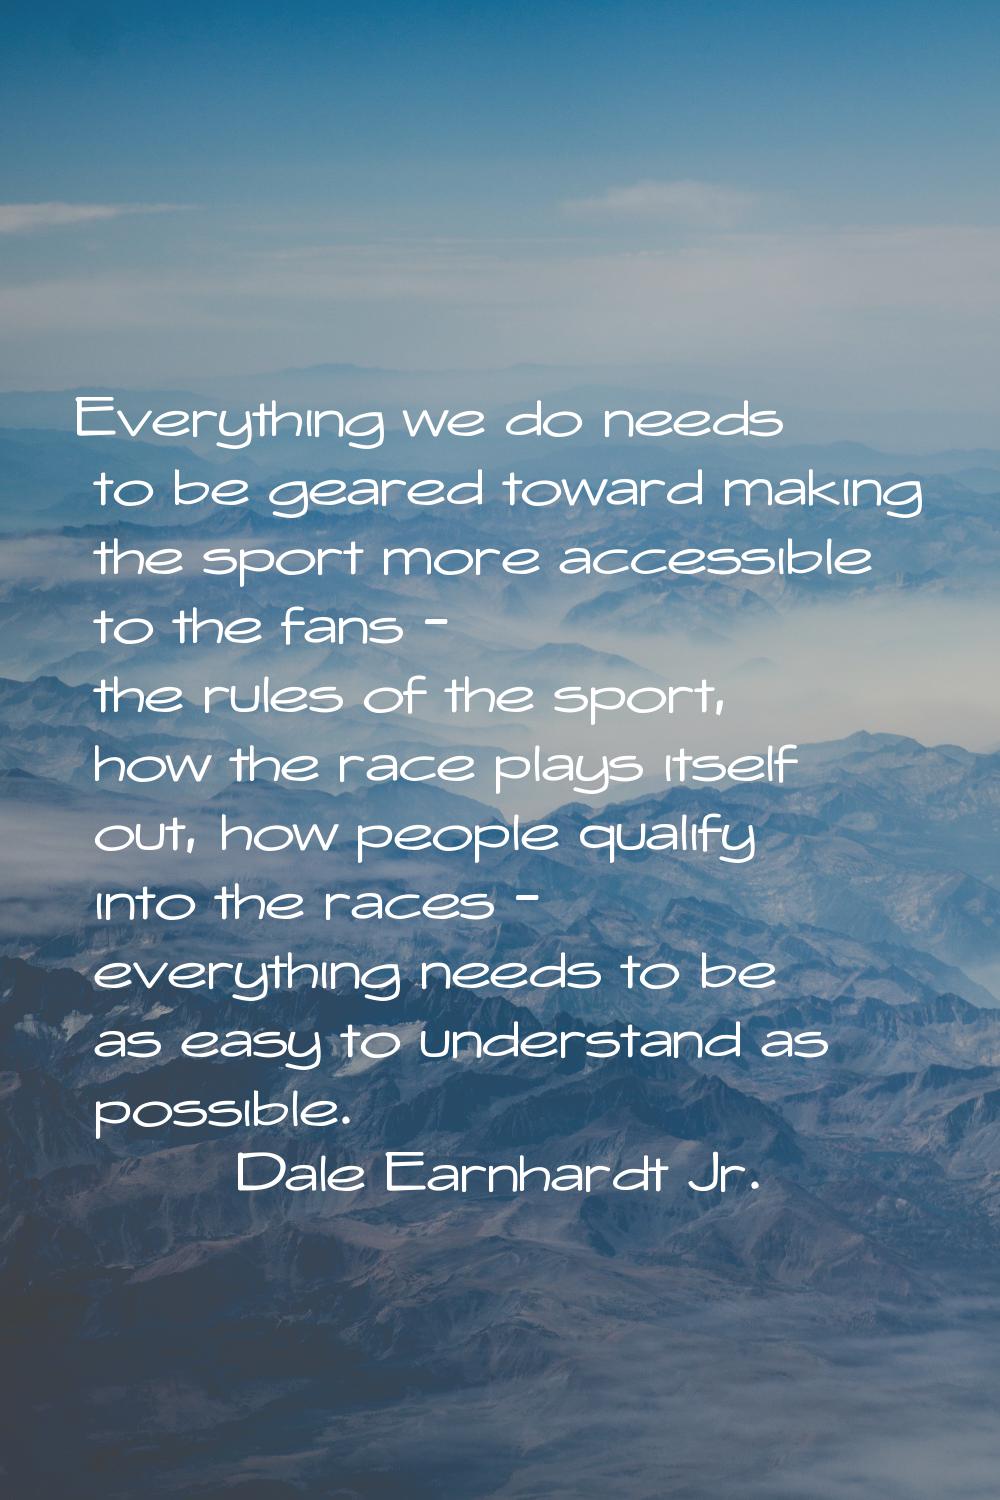 Everything we do needs to be geared toward making the sport more accessible to the fans - the rules